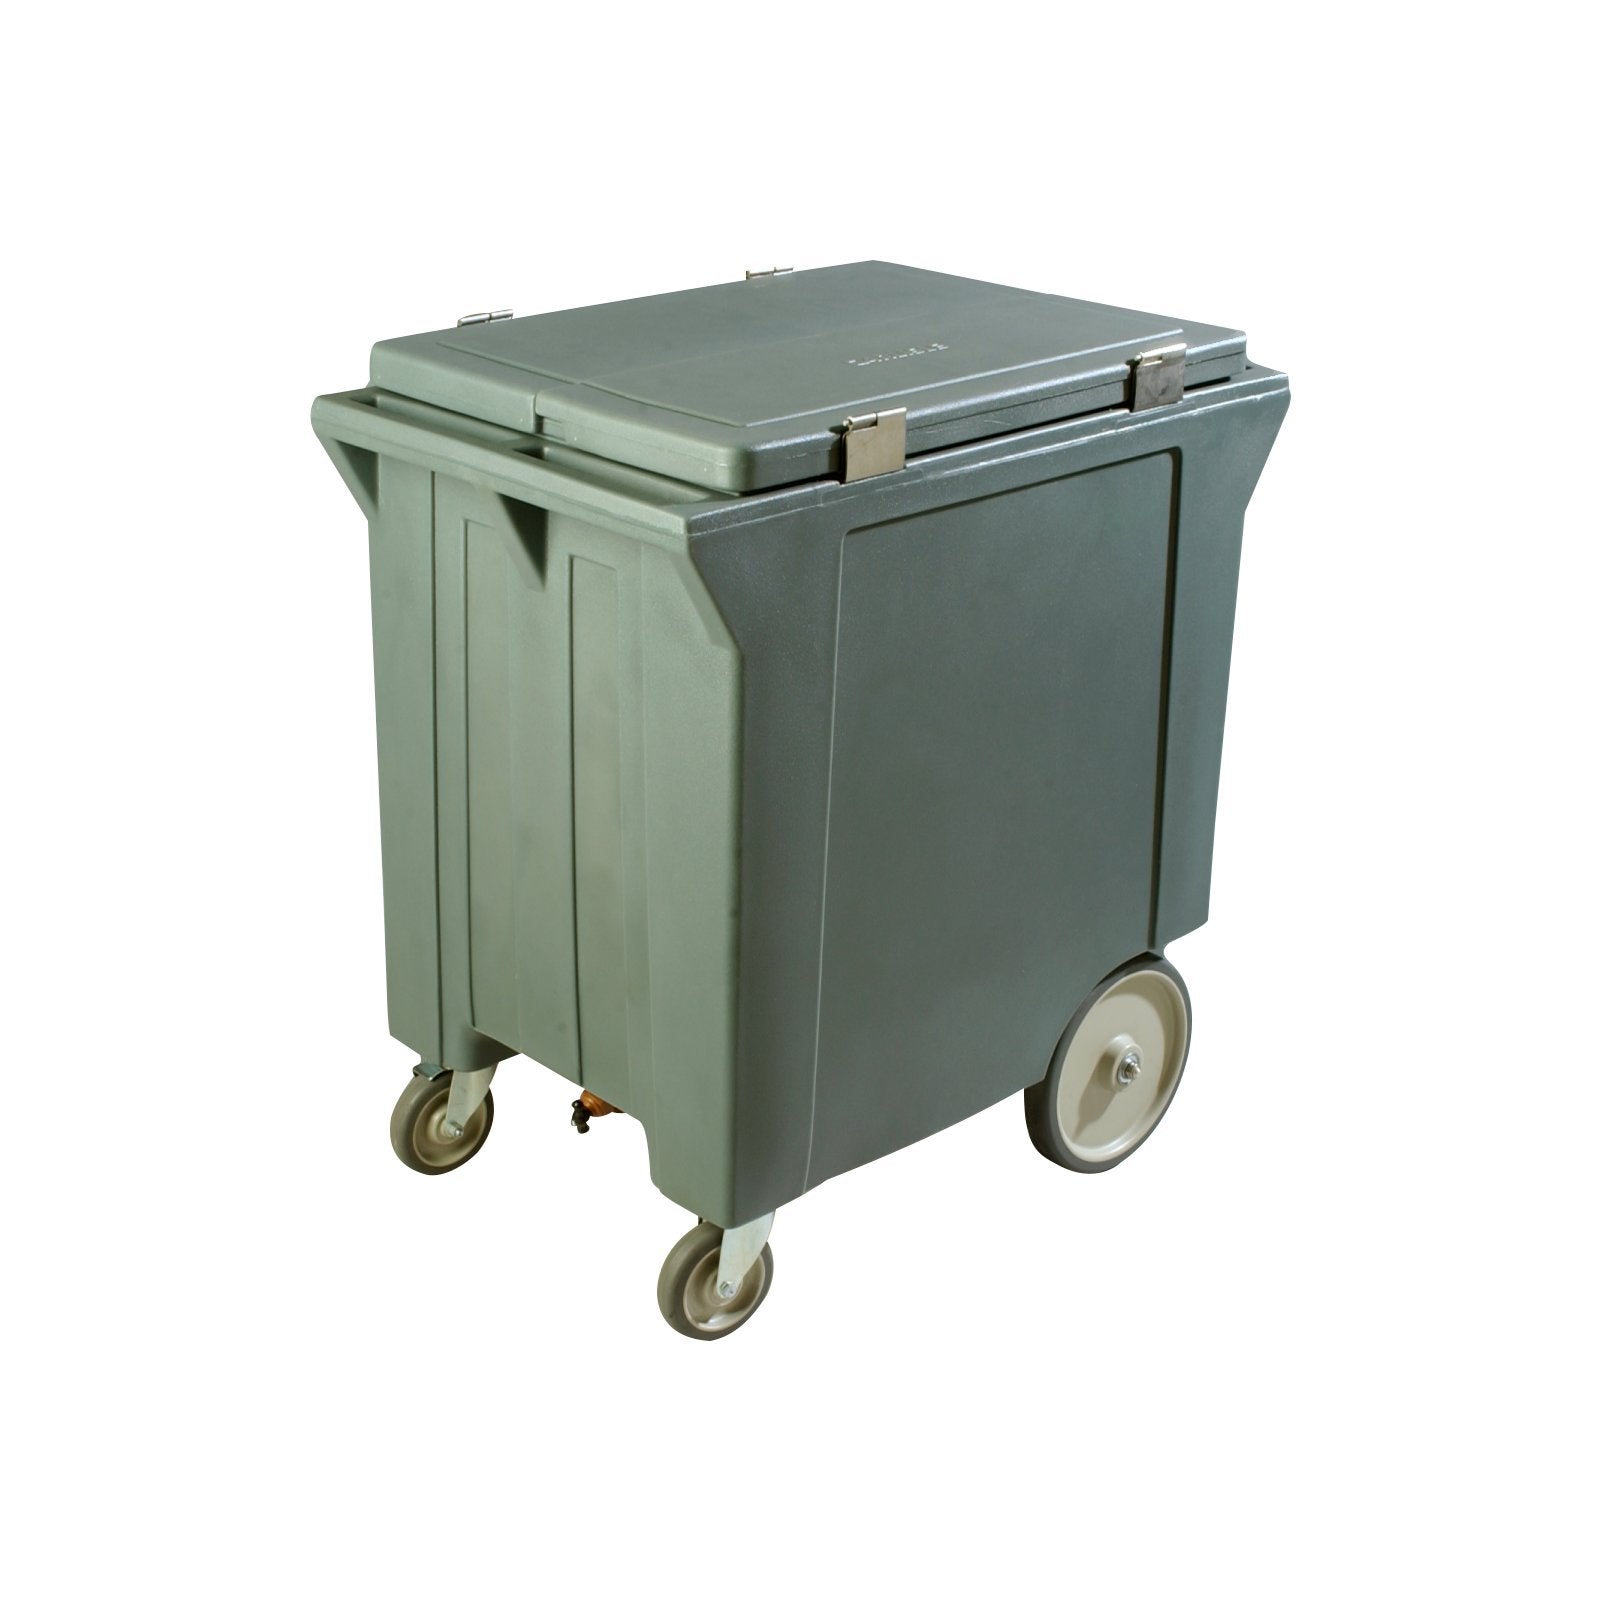 Carlisle IC2220 Cateraide Insulated Mobile 200 lb Ice Caddy